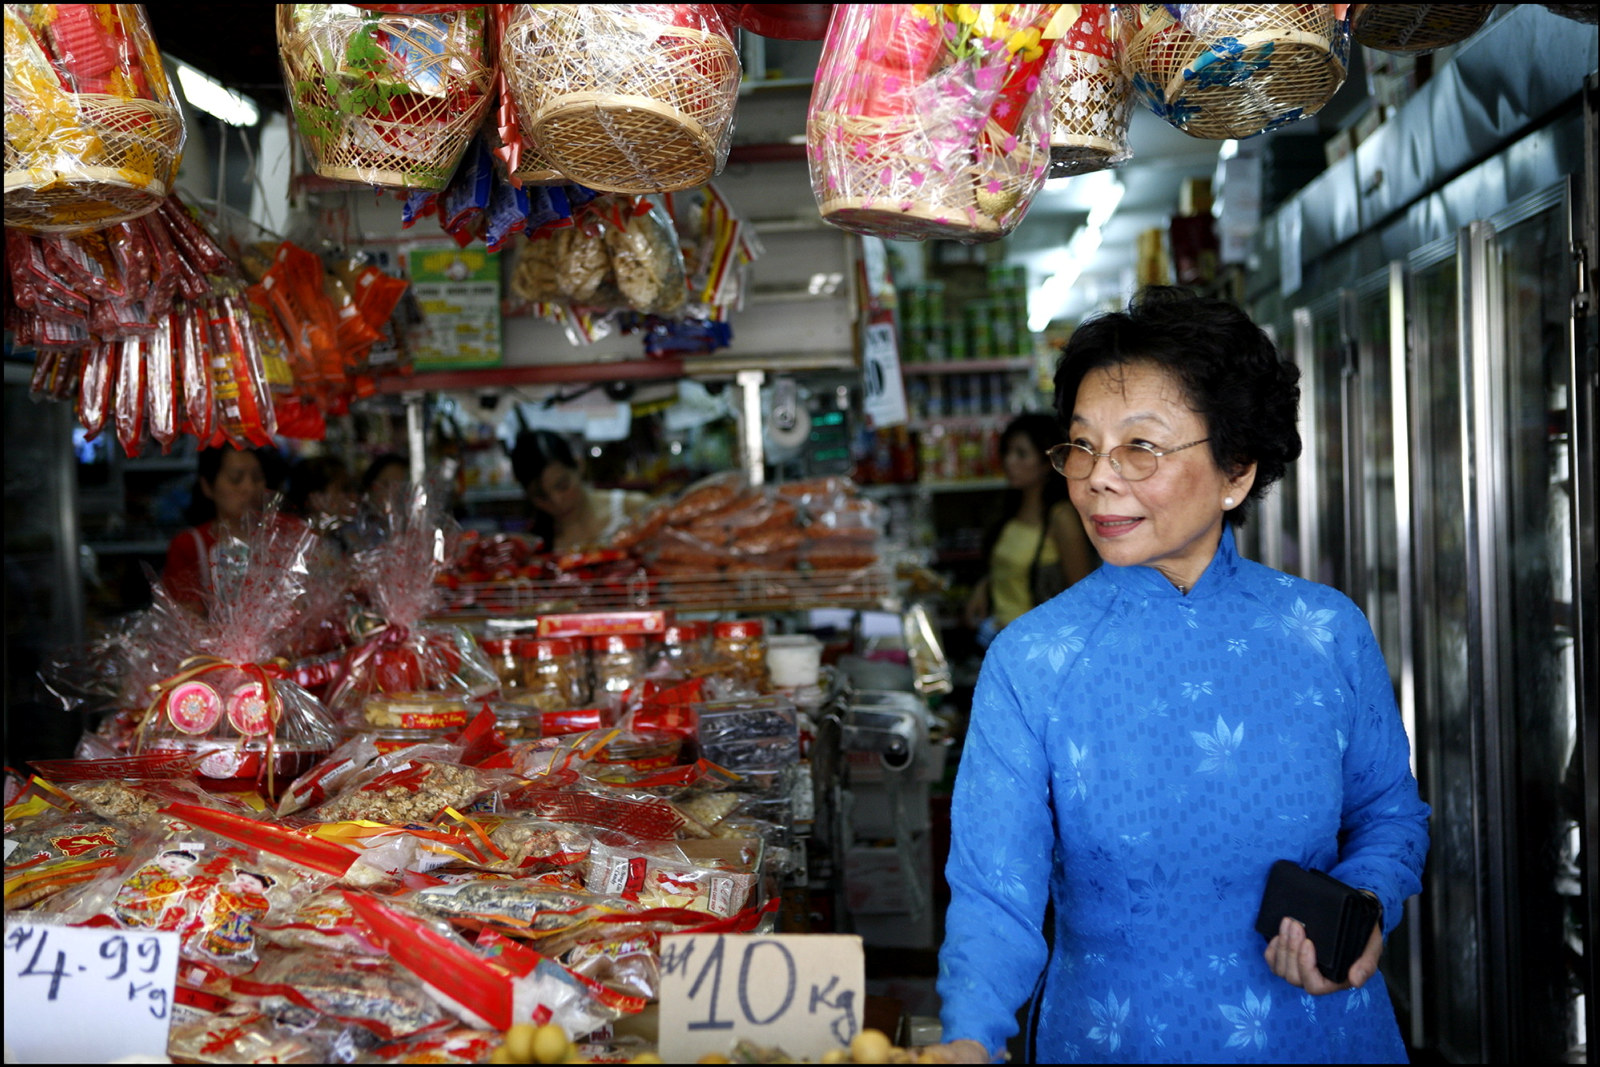 Thi Tam Nguyen stocks up on New Year treats - Rituals and Traditions of Sydney.